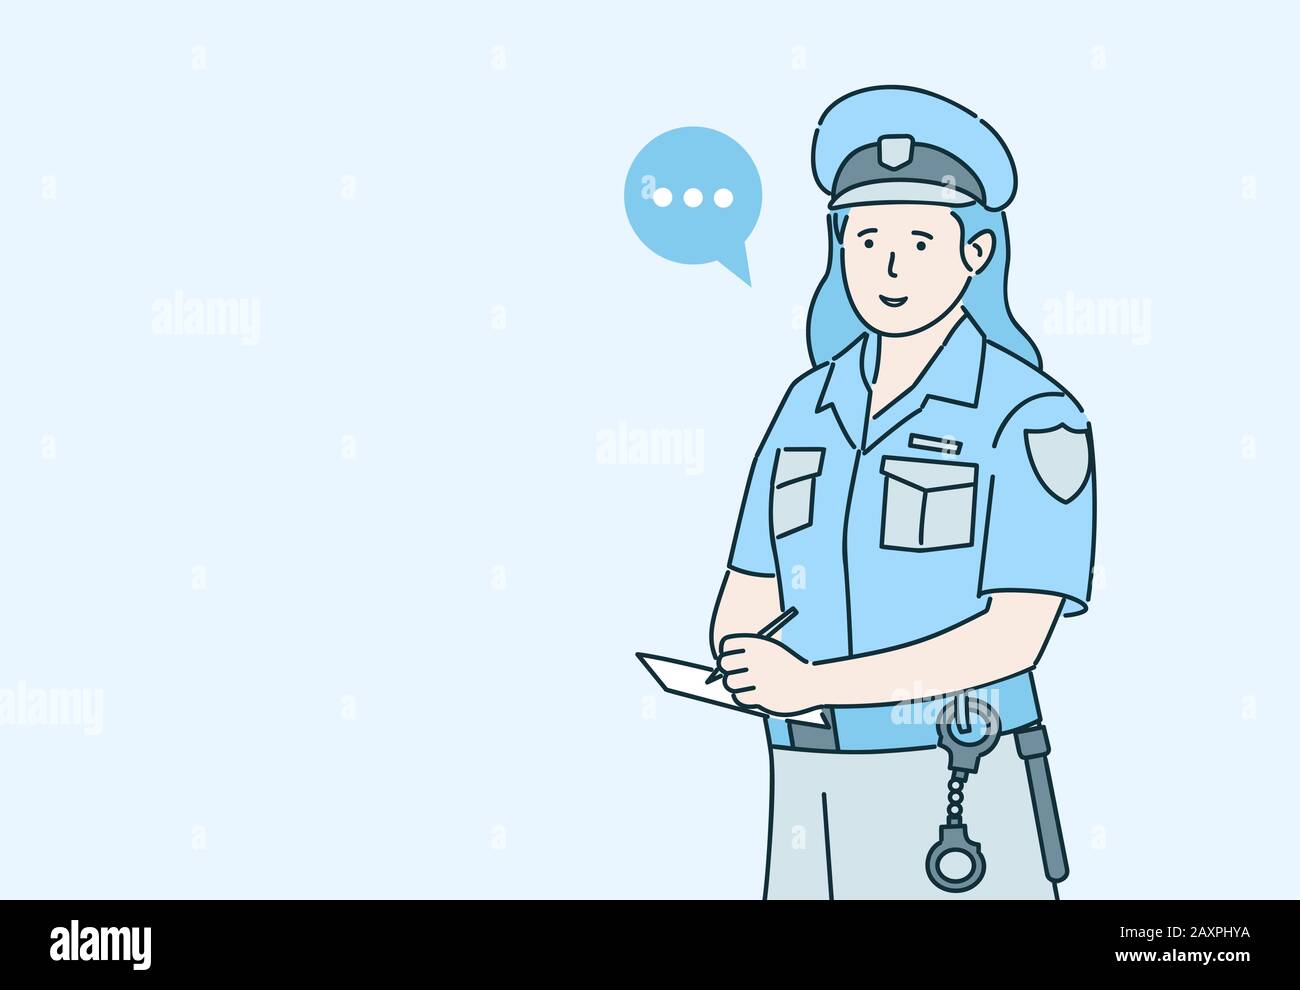 Policewoman issuing a fines cartoon vector illustration with speech bubble isolated on blue background. Security guard in uniform interviewing witnesses or issuing a parking ticket outline character. Stock Vector